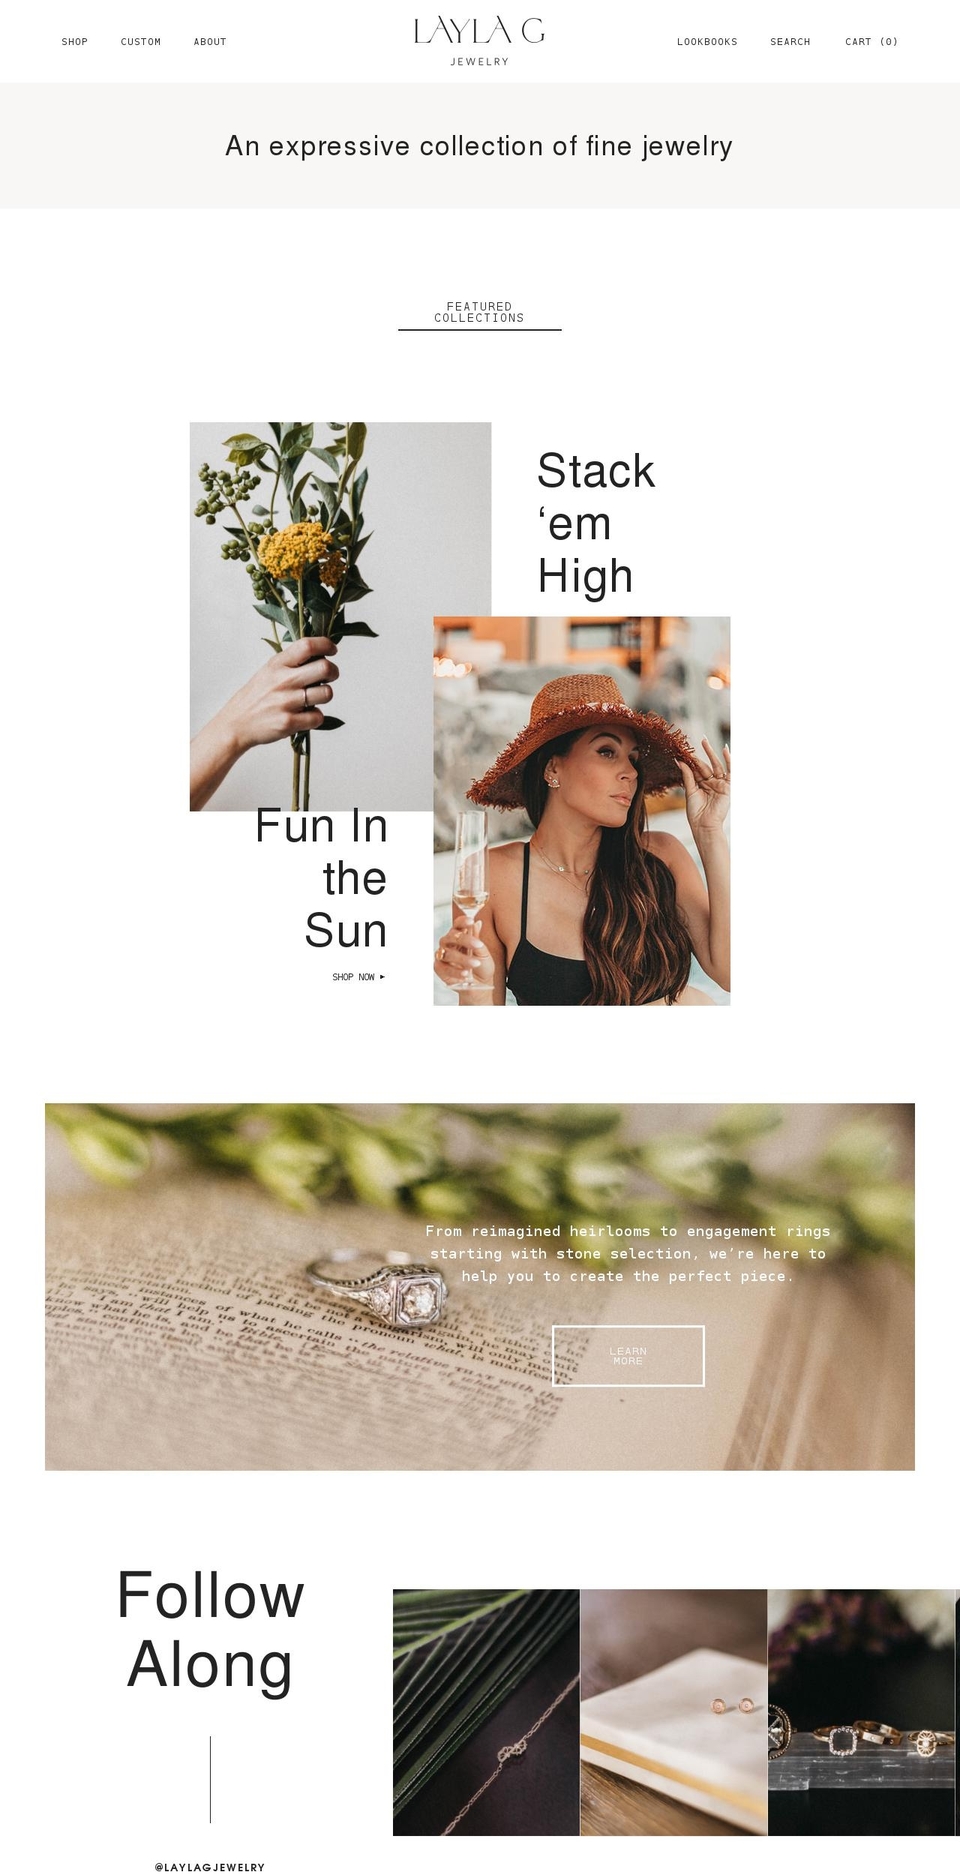 layla Shopify theme site example laylagjewelry.com